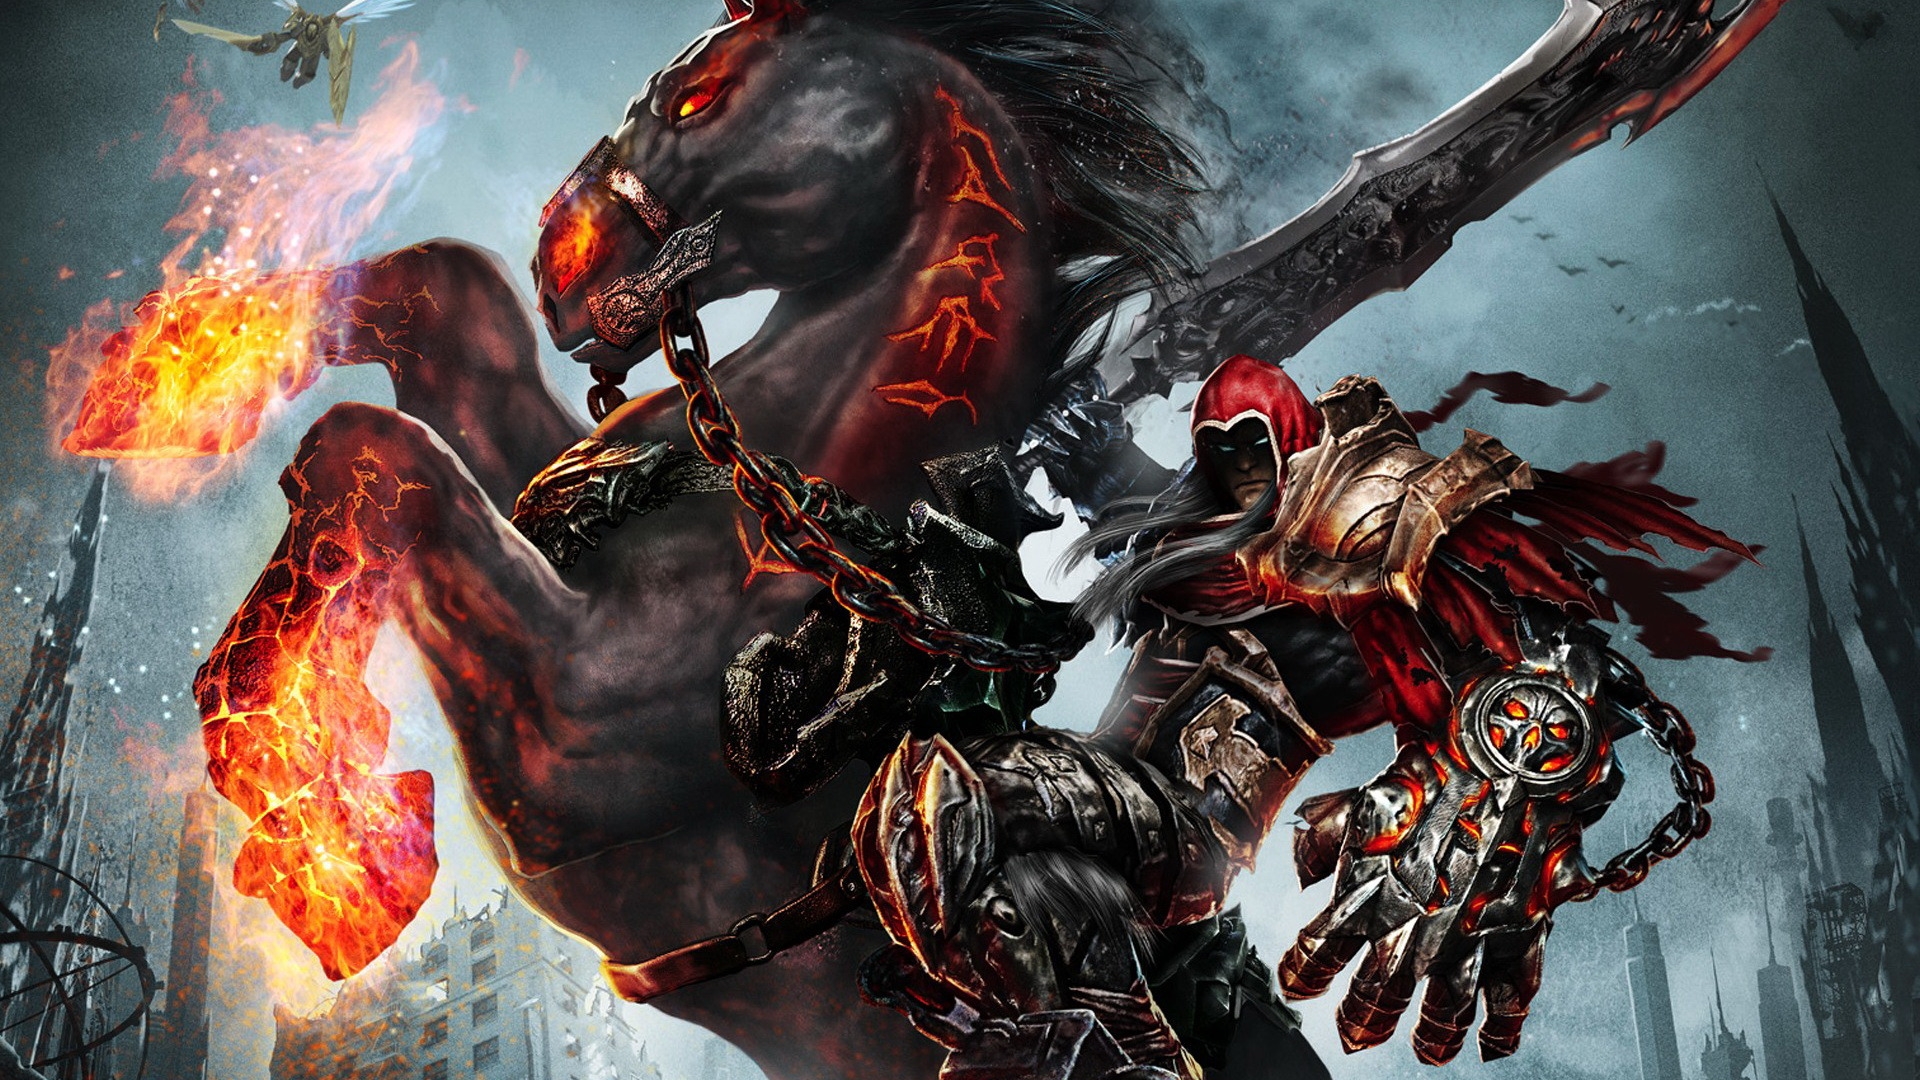 Darksiders Wrath of War Video Game for 1920 x 1080 HDTV 1080p resolution